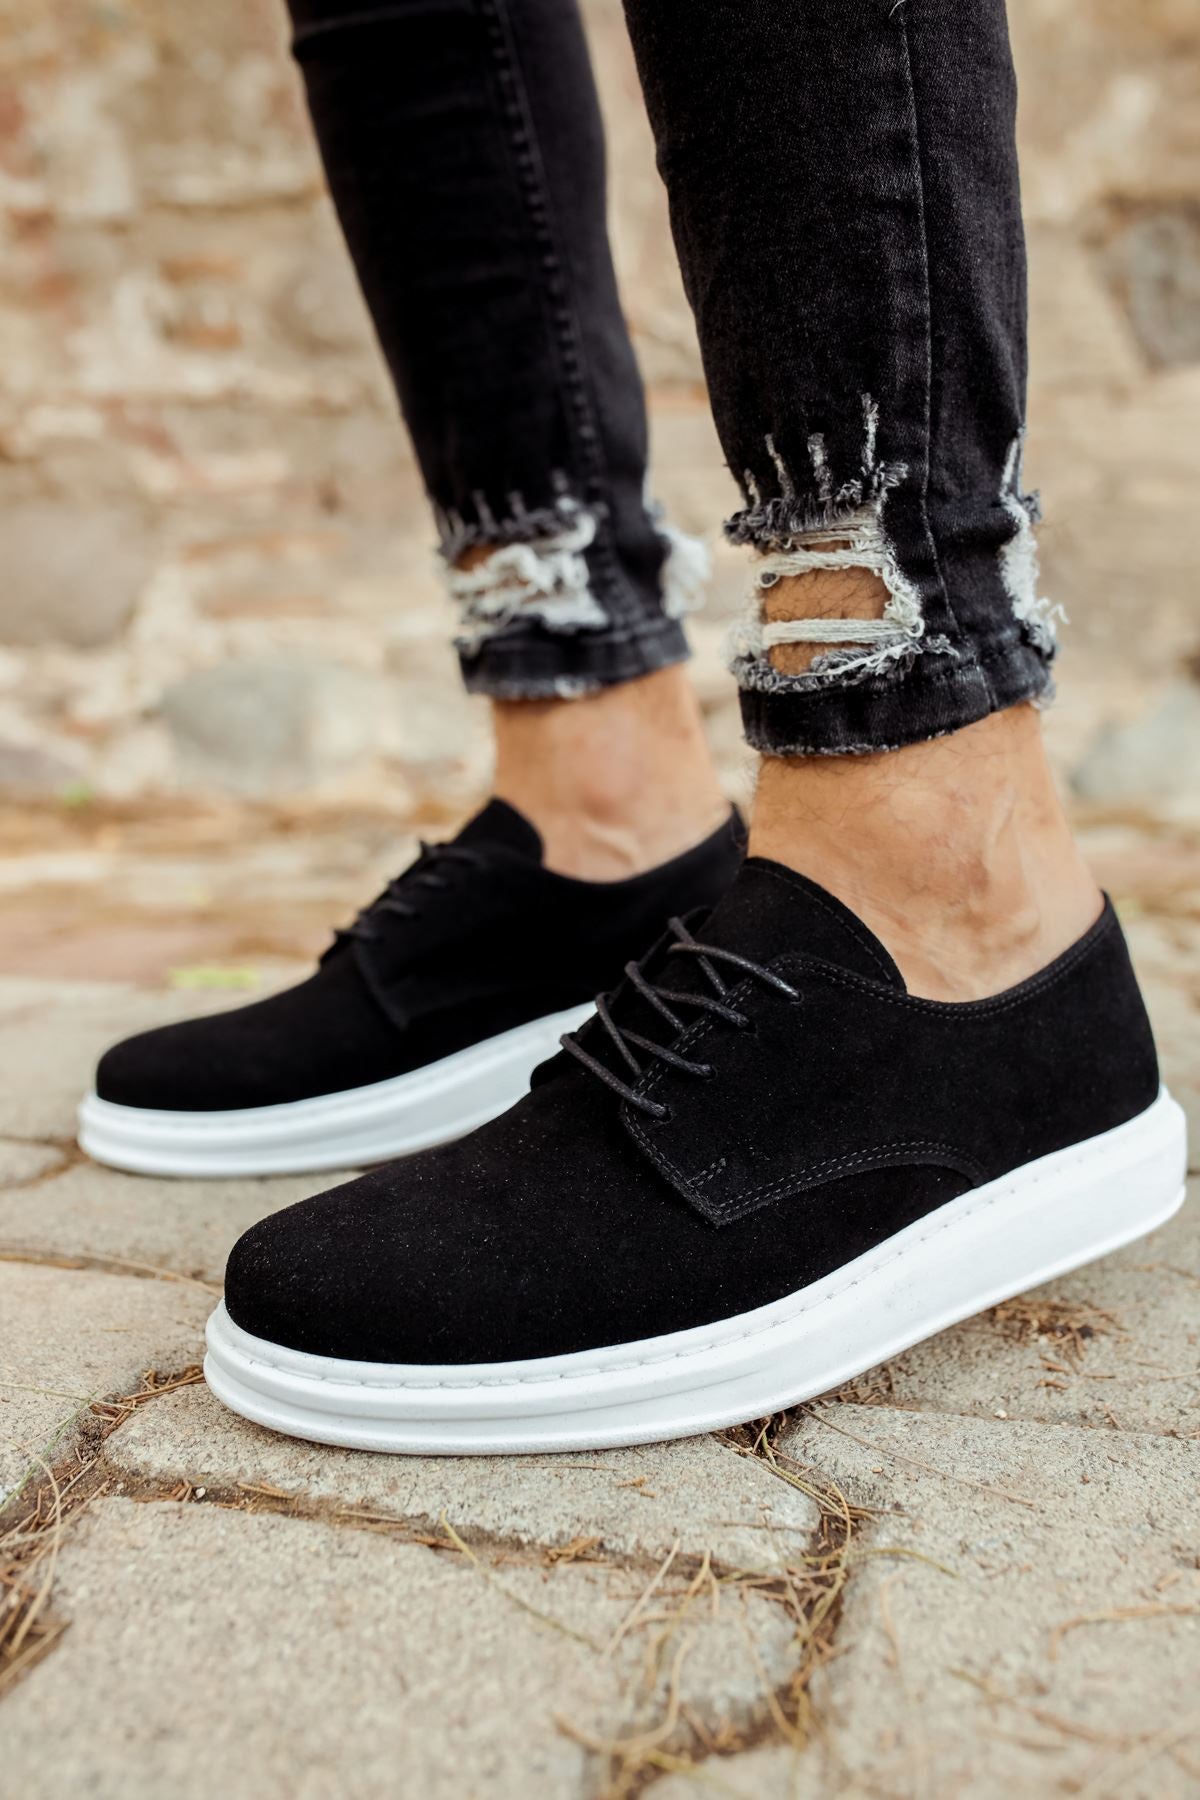 CH003 Suede BT Men's Sneaker Casual Shoes Black - STREETMODE ™